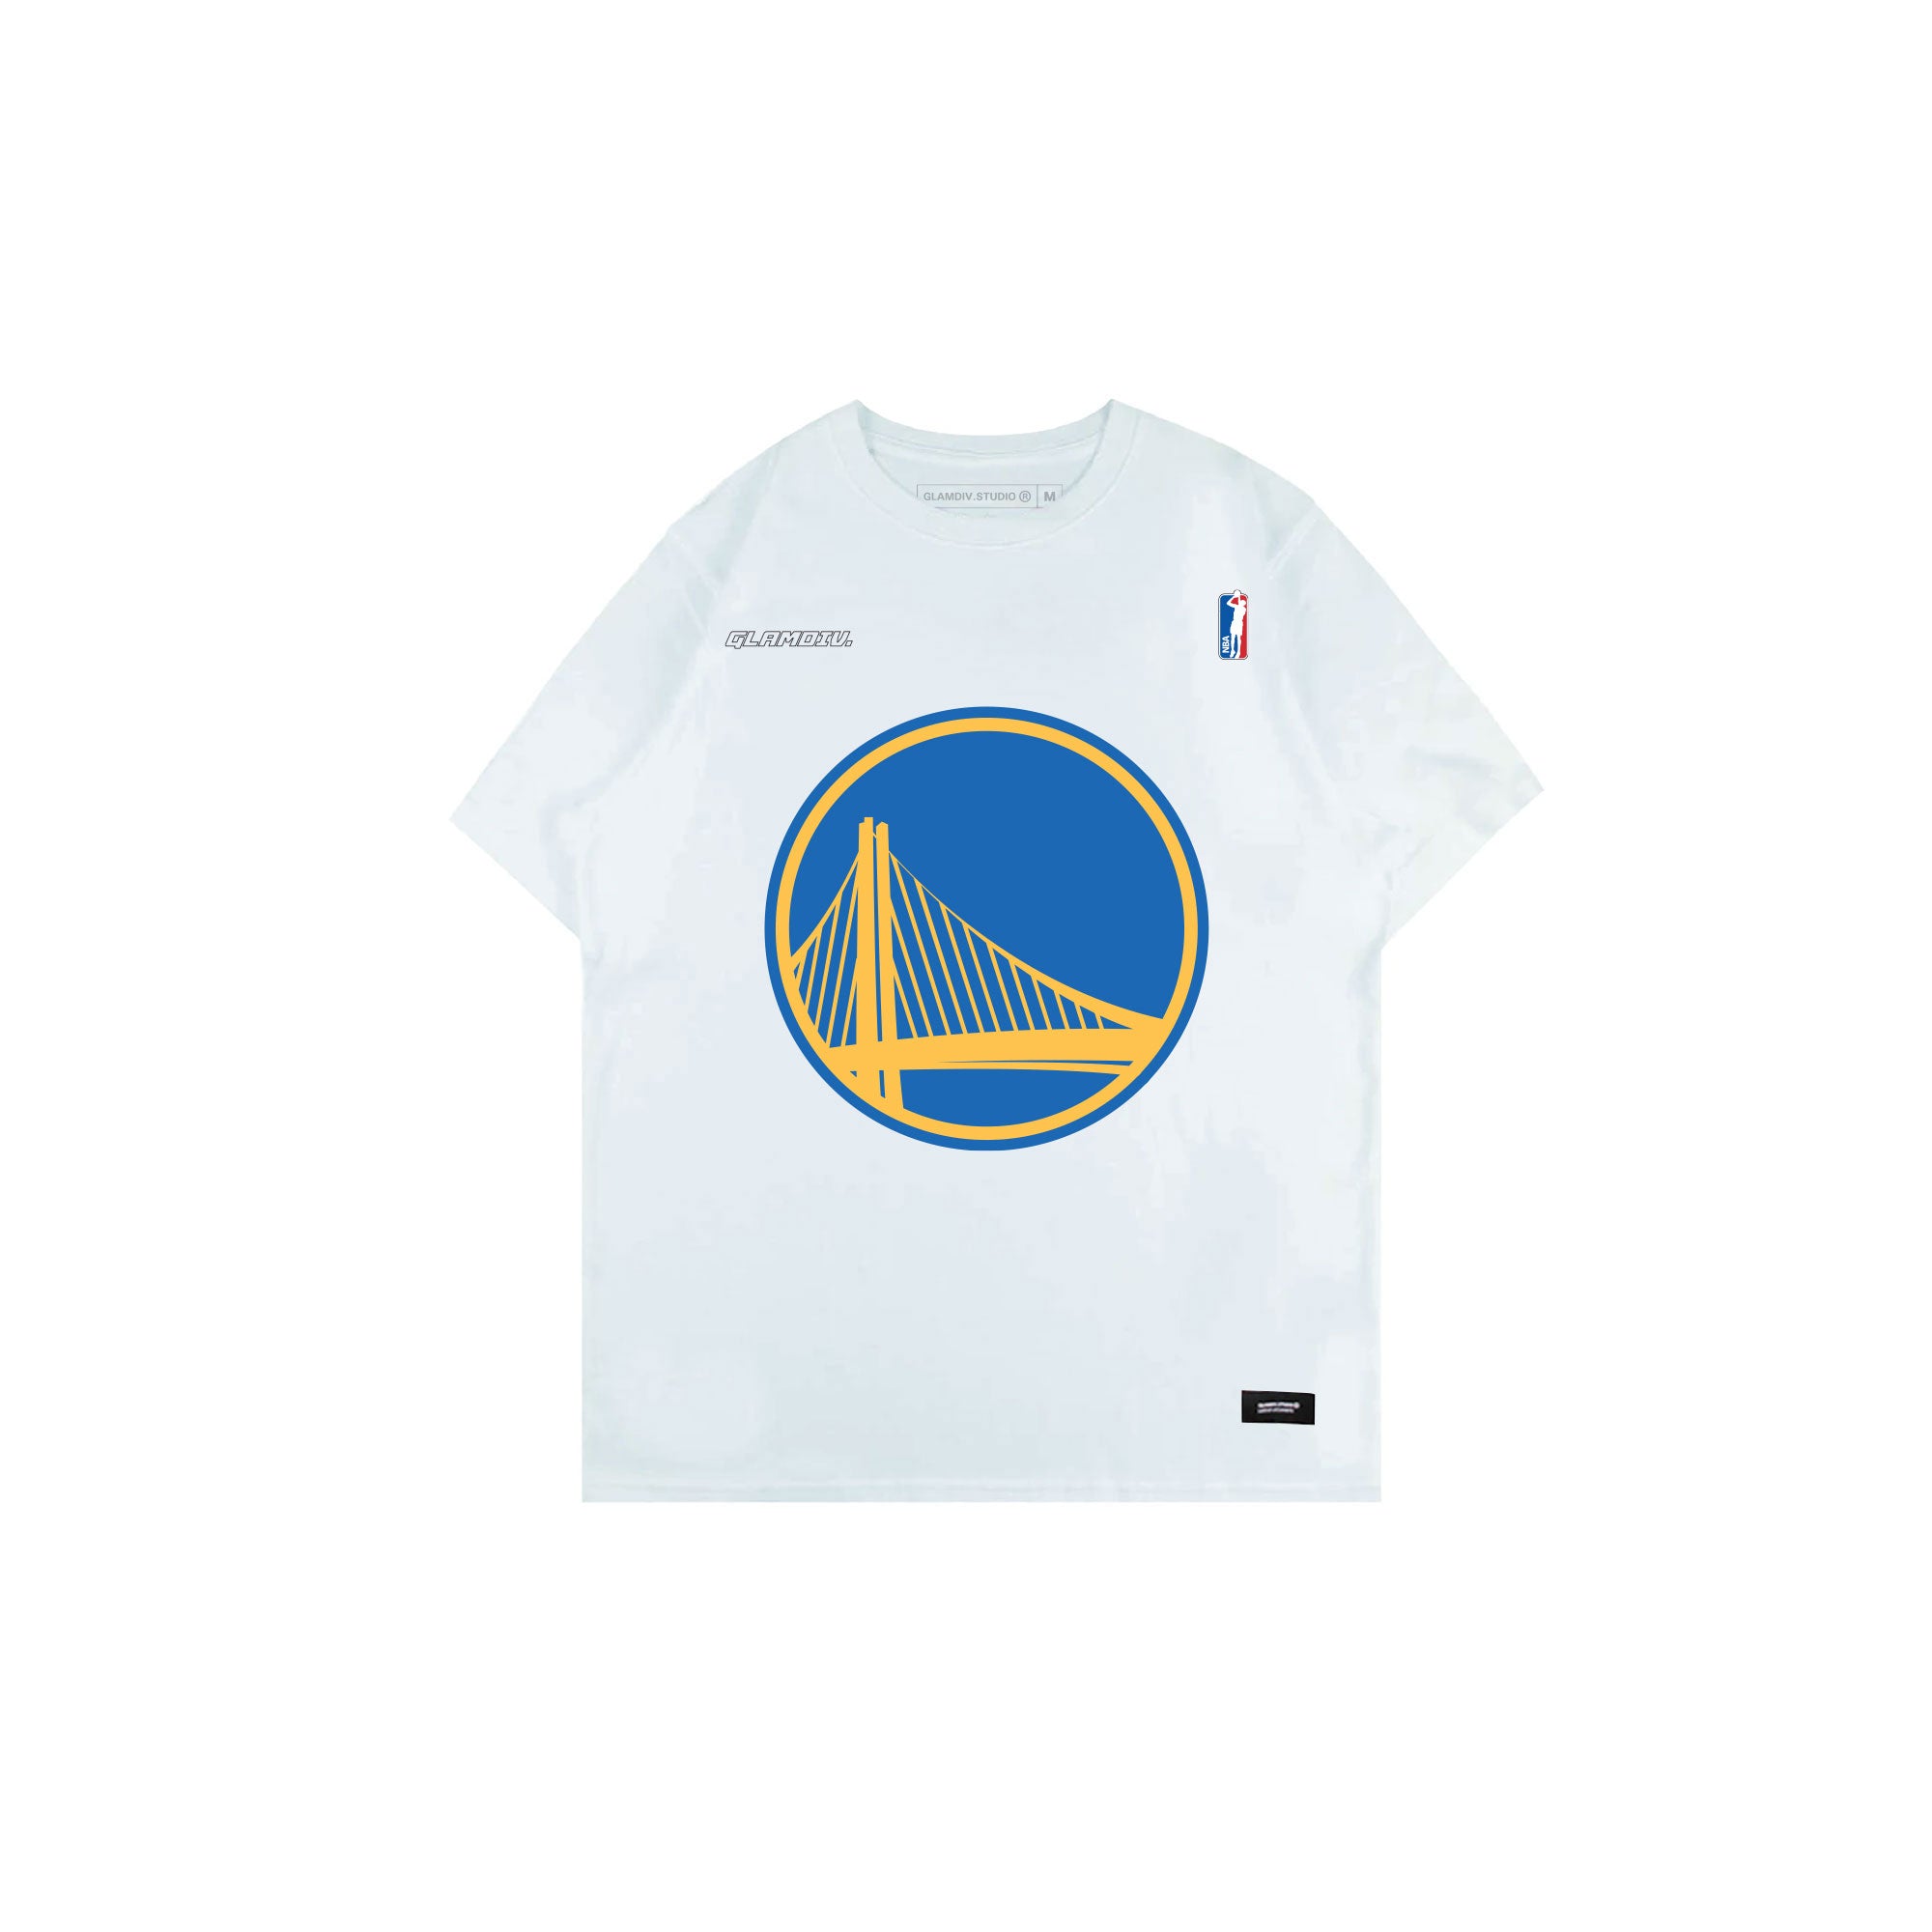 GlamDiv | Curry ICDAT Tee White